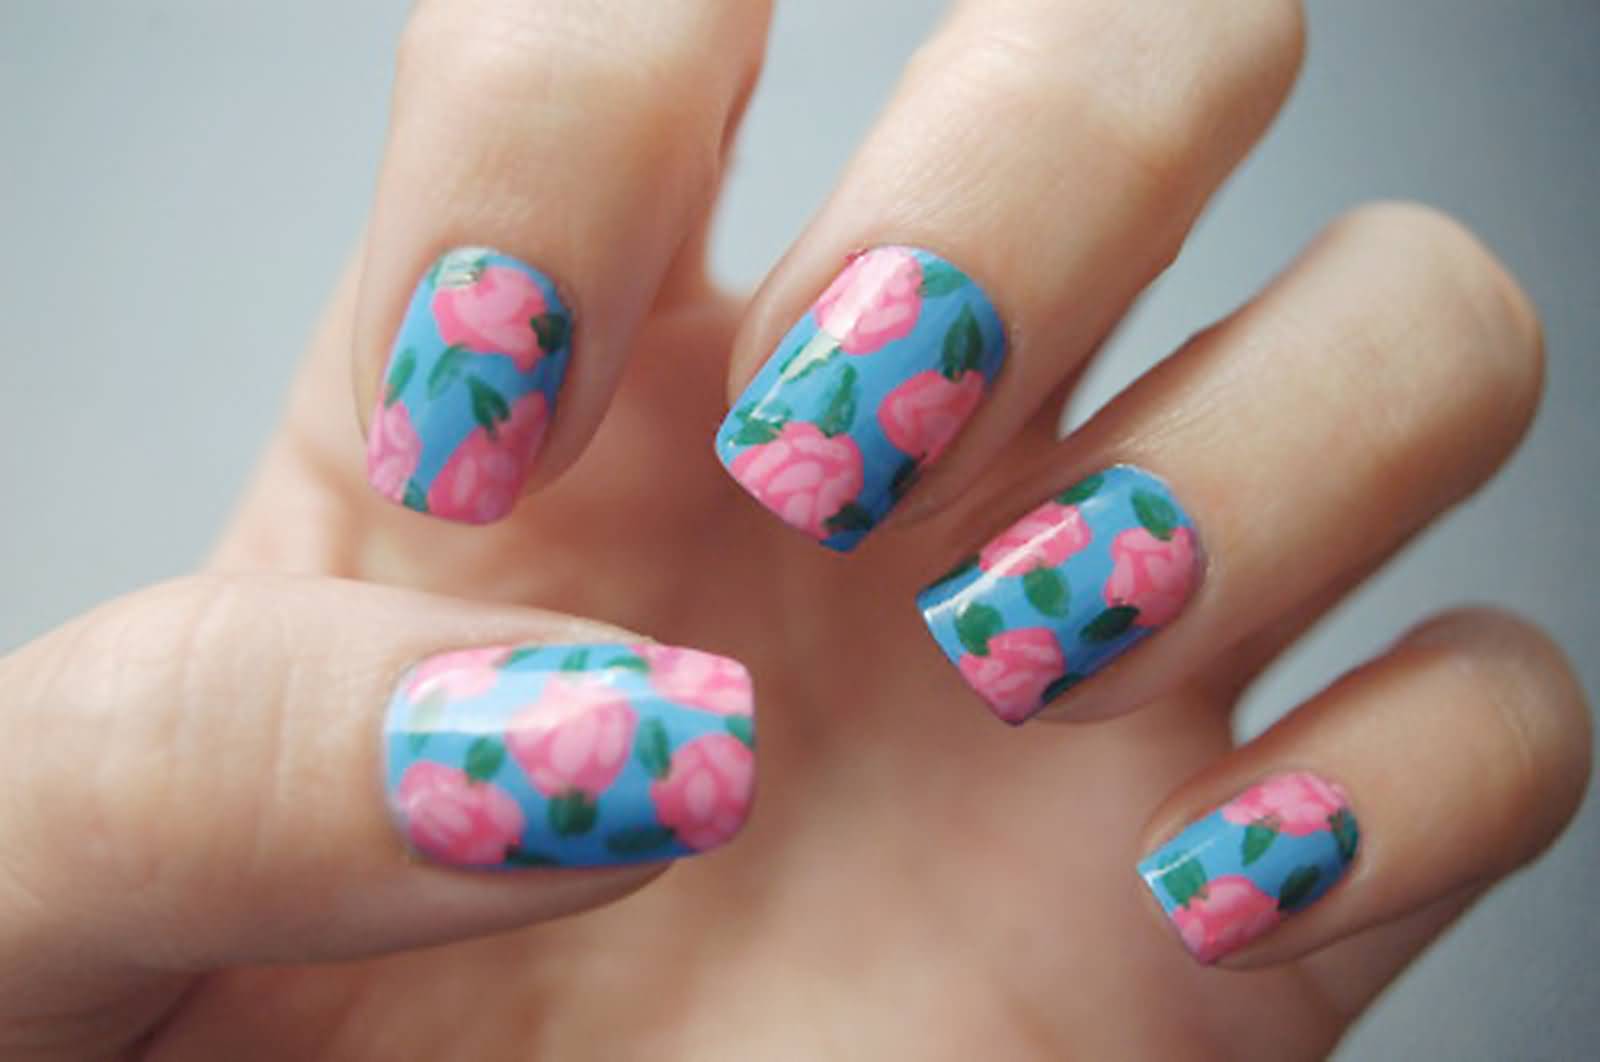 Blue Base Nails With Pink Floral Design Nail Art